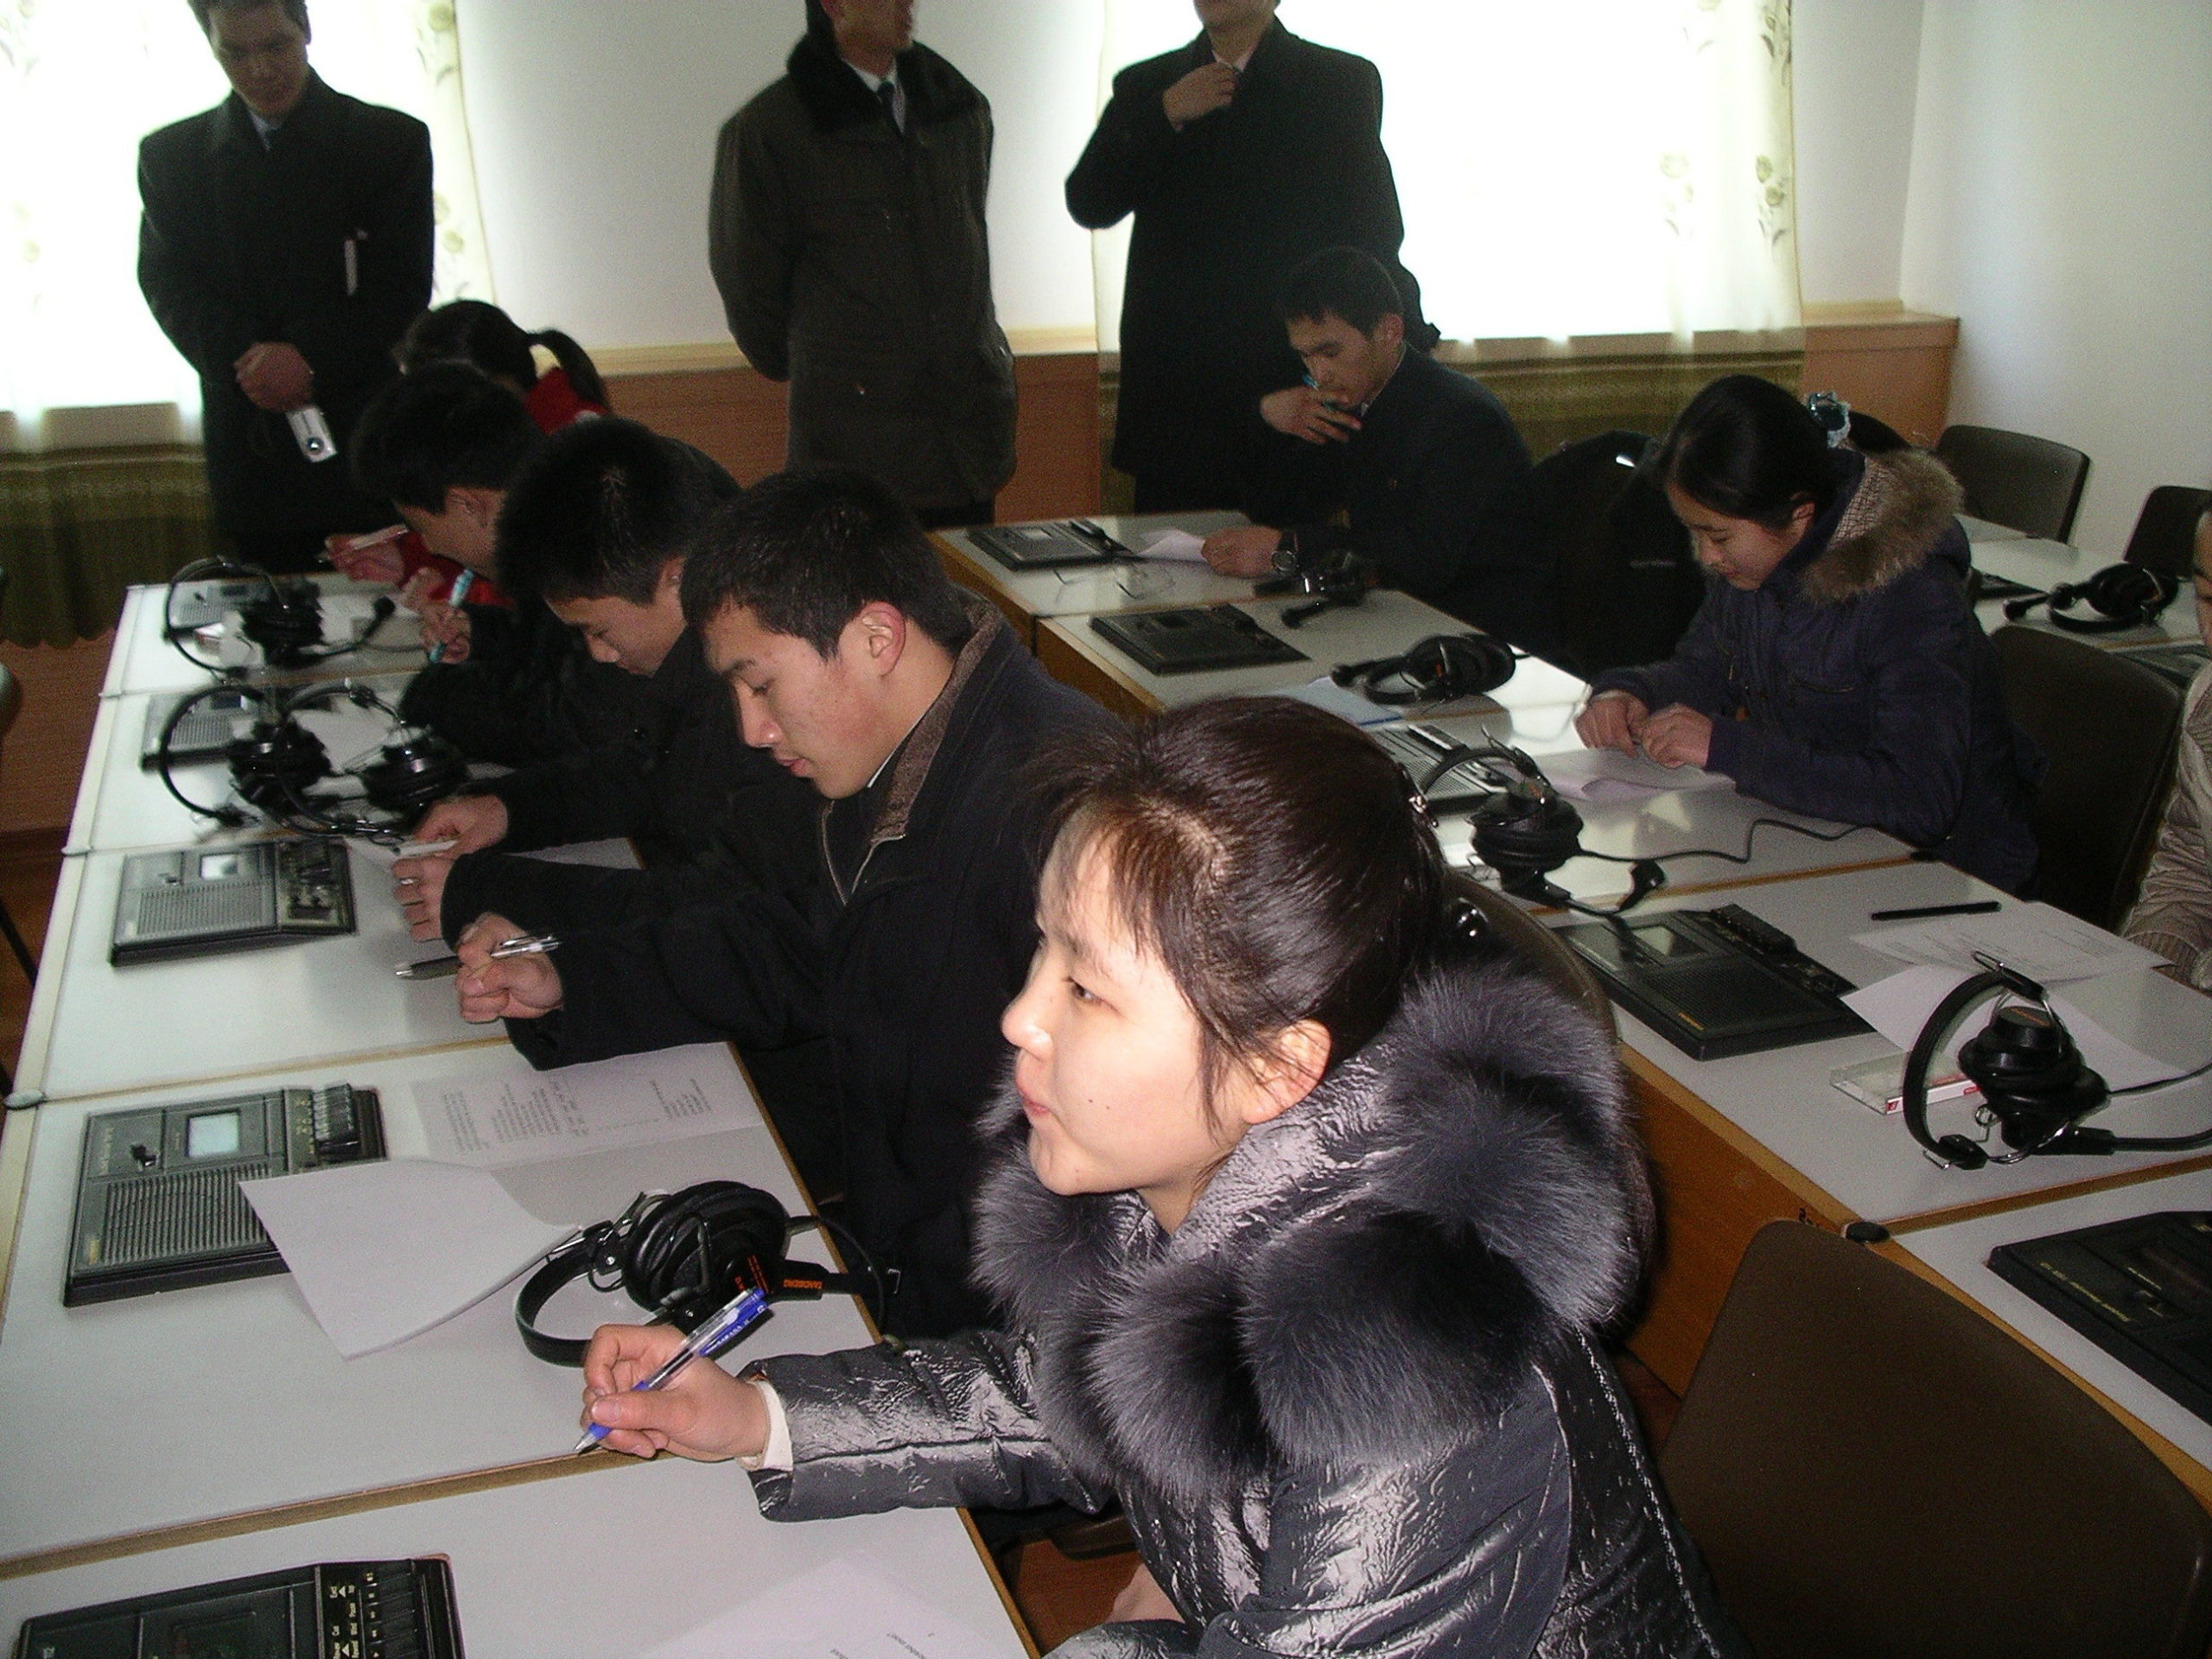 Girl in a winter coat seated at desk with more students seated further in a row with headphones and notebooks in front of them